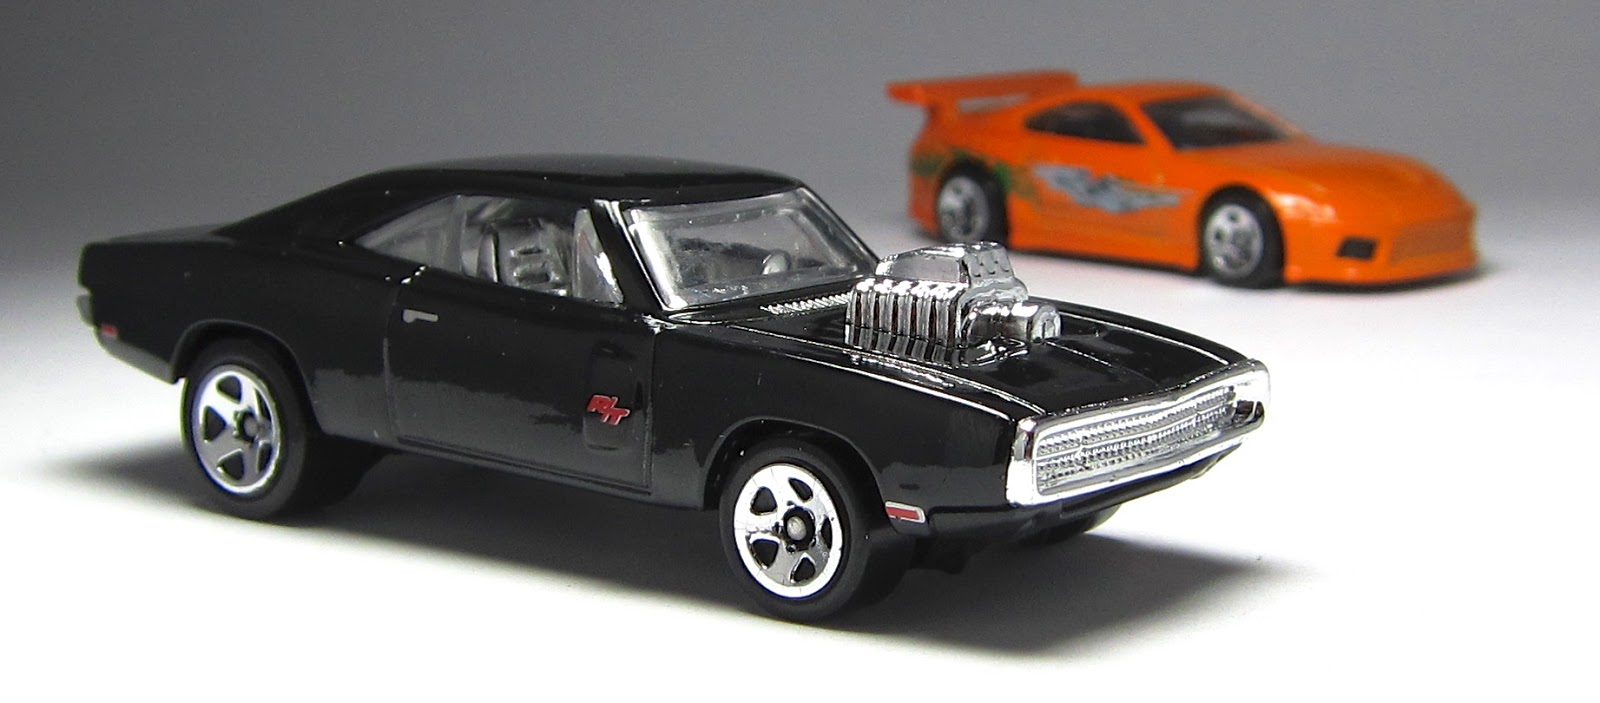 Best Motorcycle 2014: First Look: Hot Wheels Fast & Furious '70 Dodge